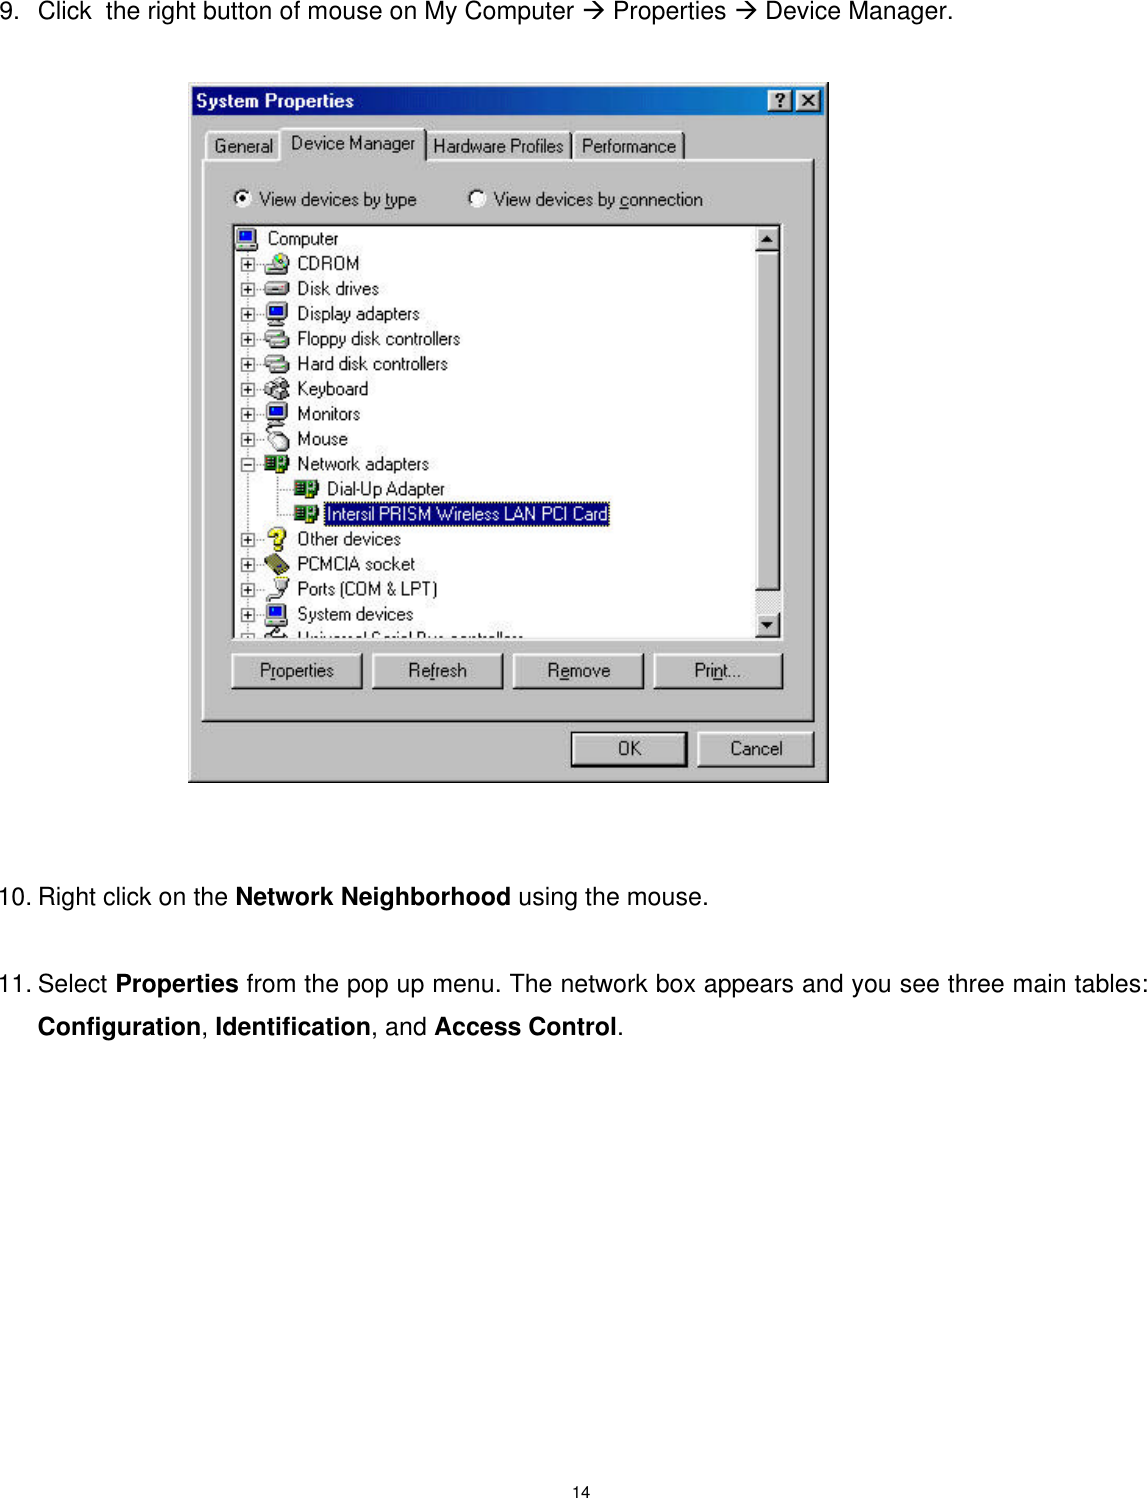  14    9. Click  the right button of mouse on My Computer à Properties à Device Manager.                                 10. Right click on the Network Neighborhood using the mouse.  11. Select Properties from the pop up menu. The network box appears and you see three main tables: Configuration, Identification, and Access Control.   